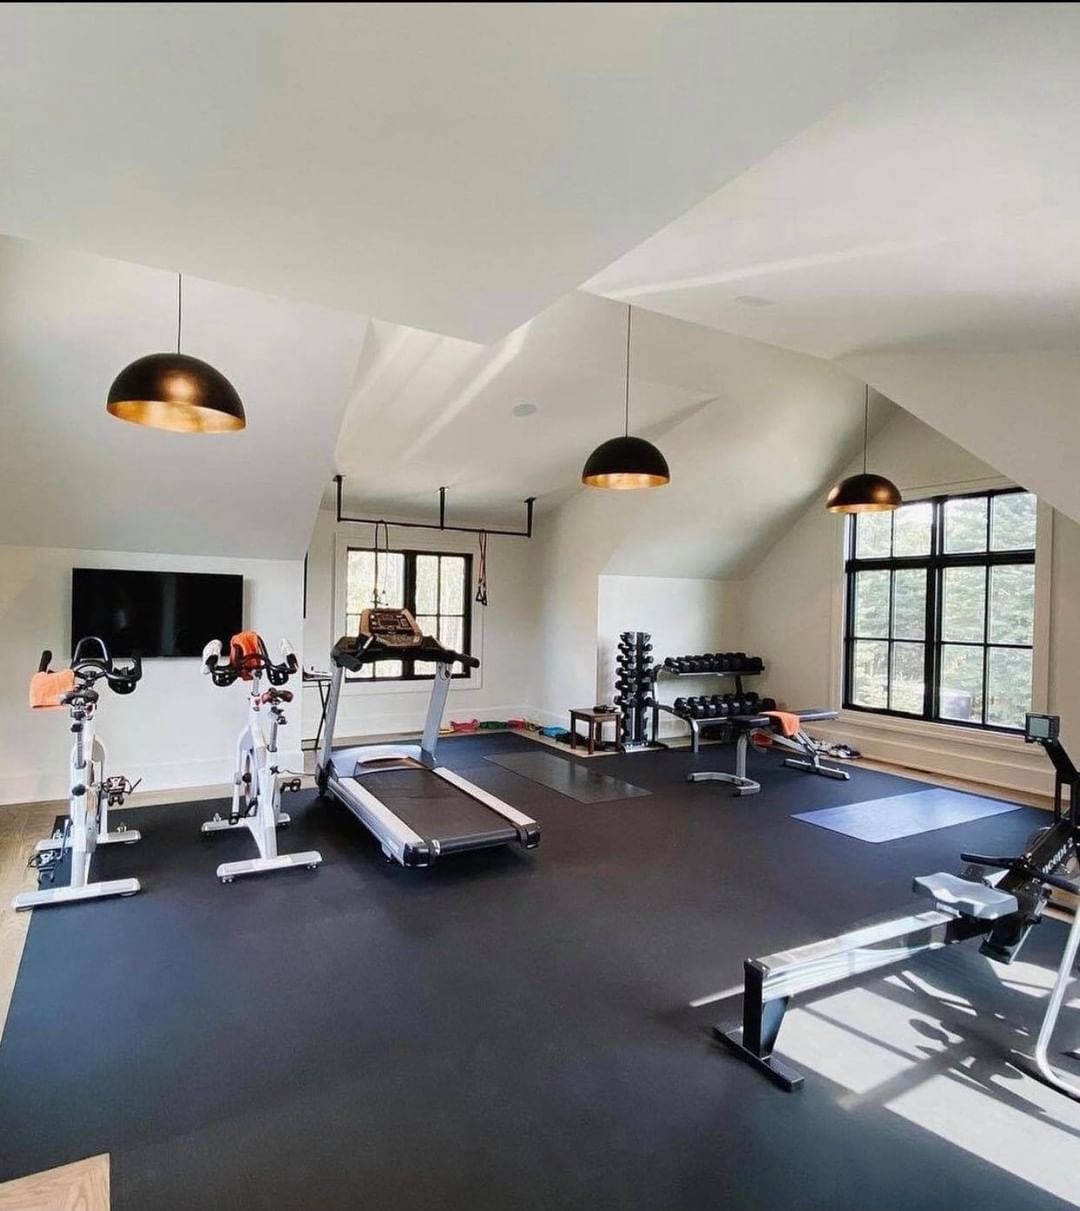 Home Gym Set Up in an Attic With Rubber Flooring. Photo by Instagram user @relaxwellnessbeauty